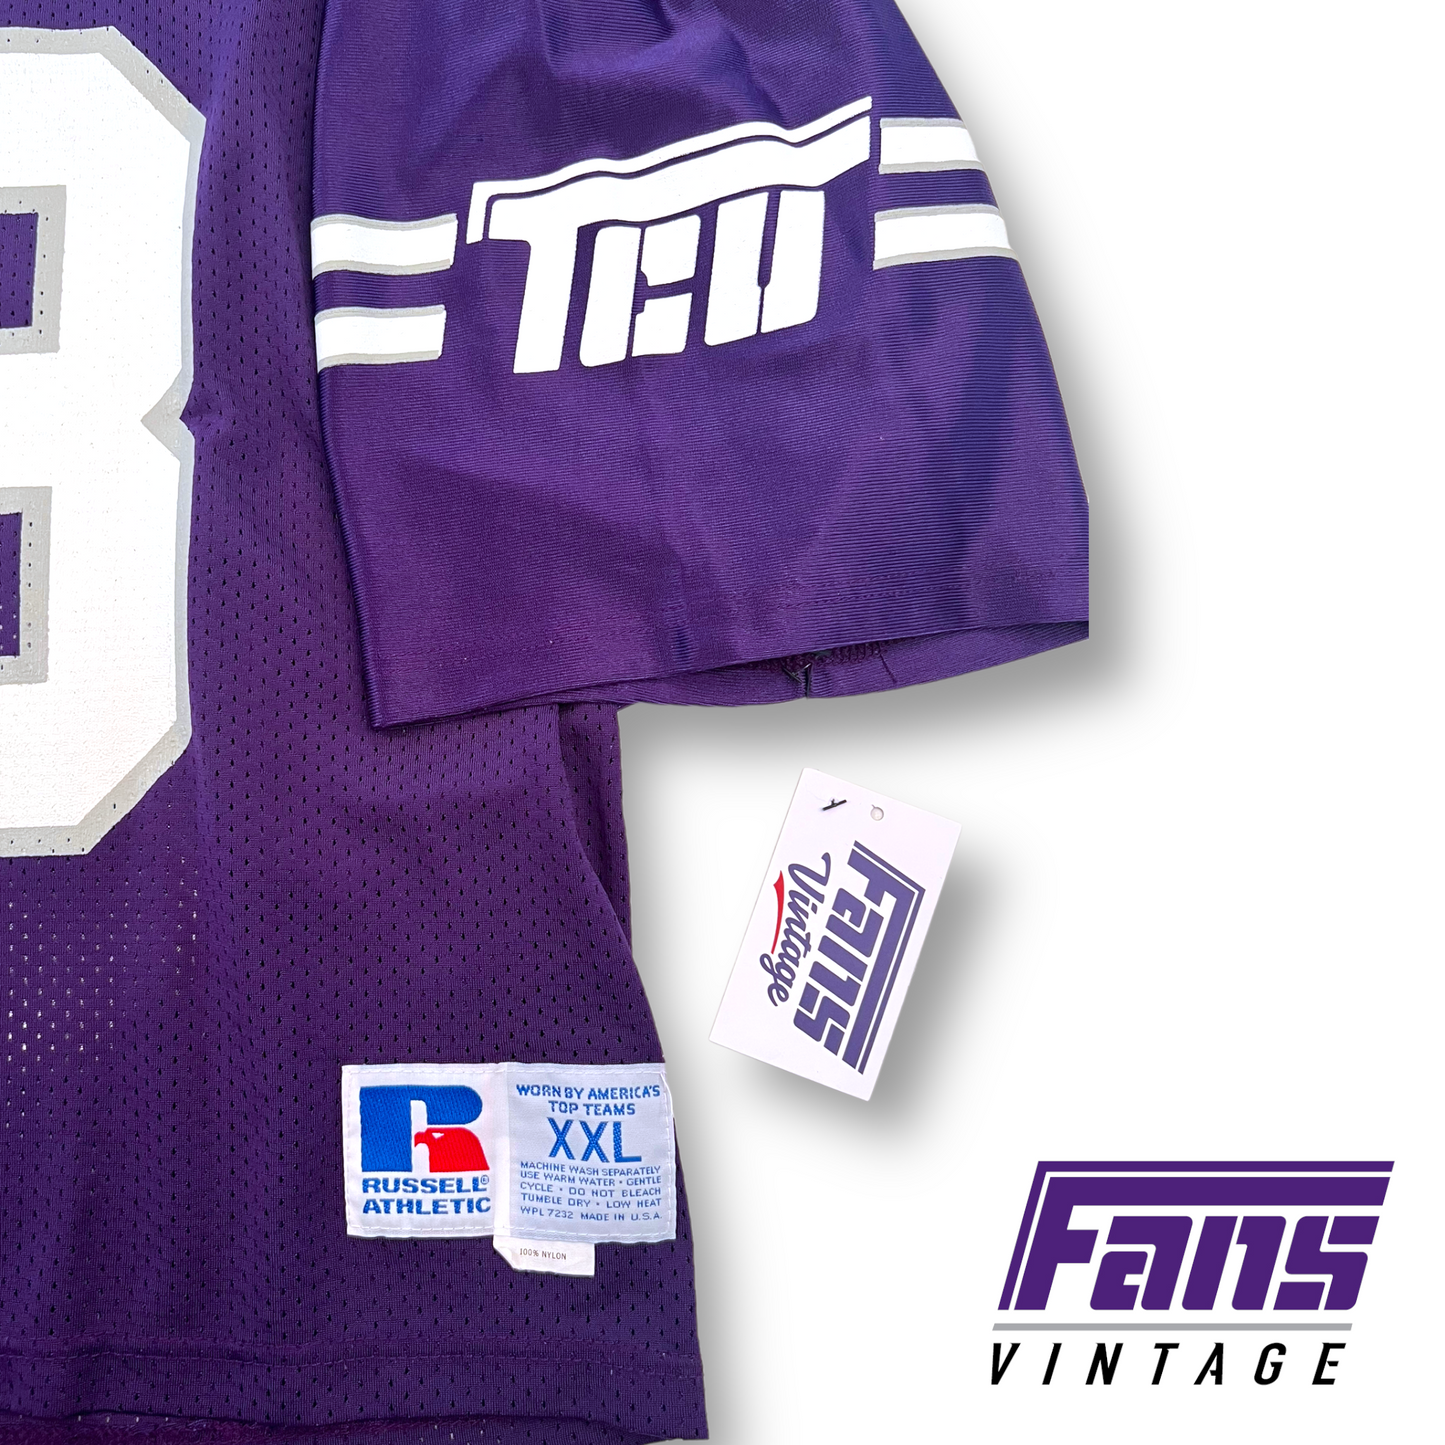 *GRAIL* Near-perfect condition vintage TEAM ISSUE TCU Football FLYING T Jersey - GAME WORN!